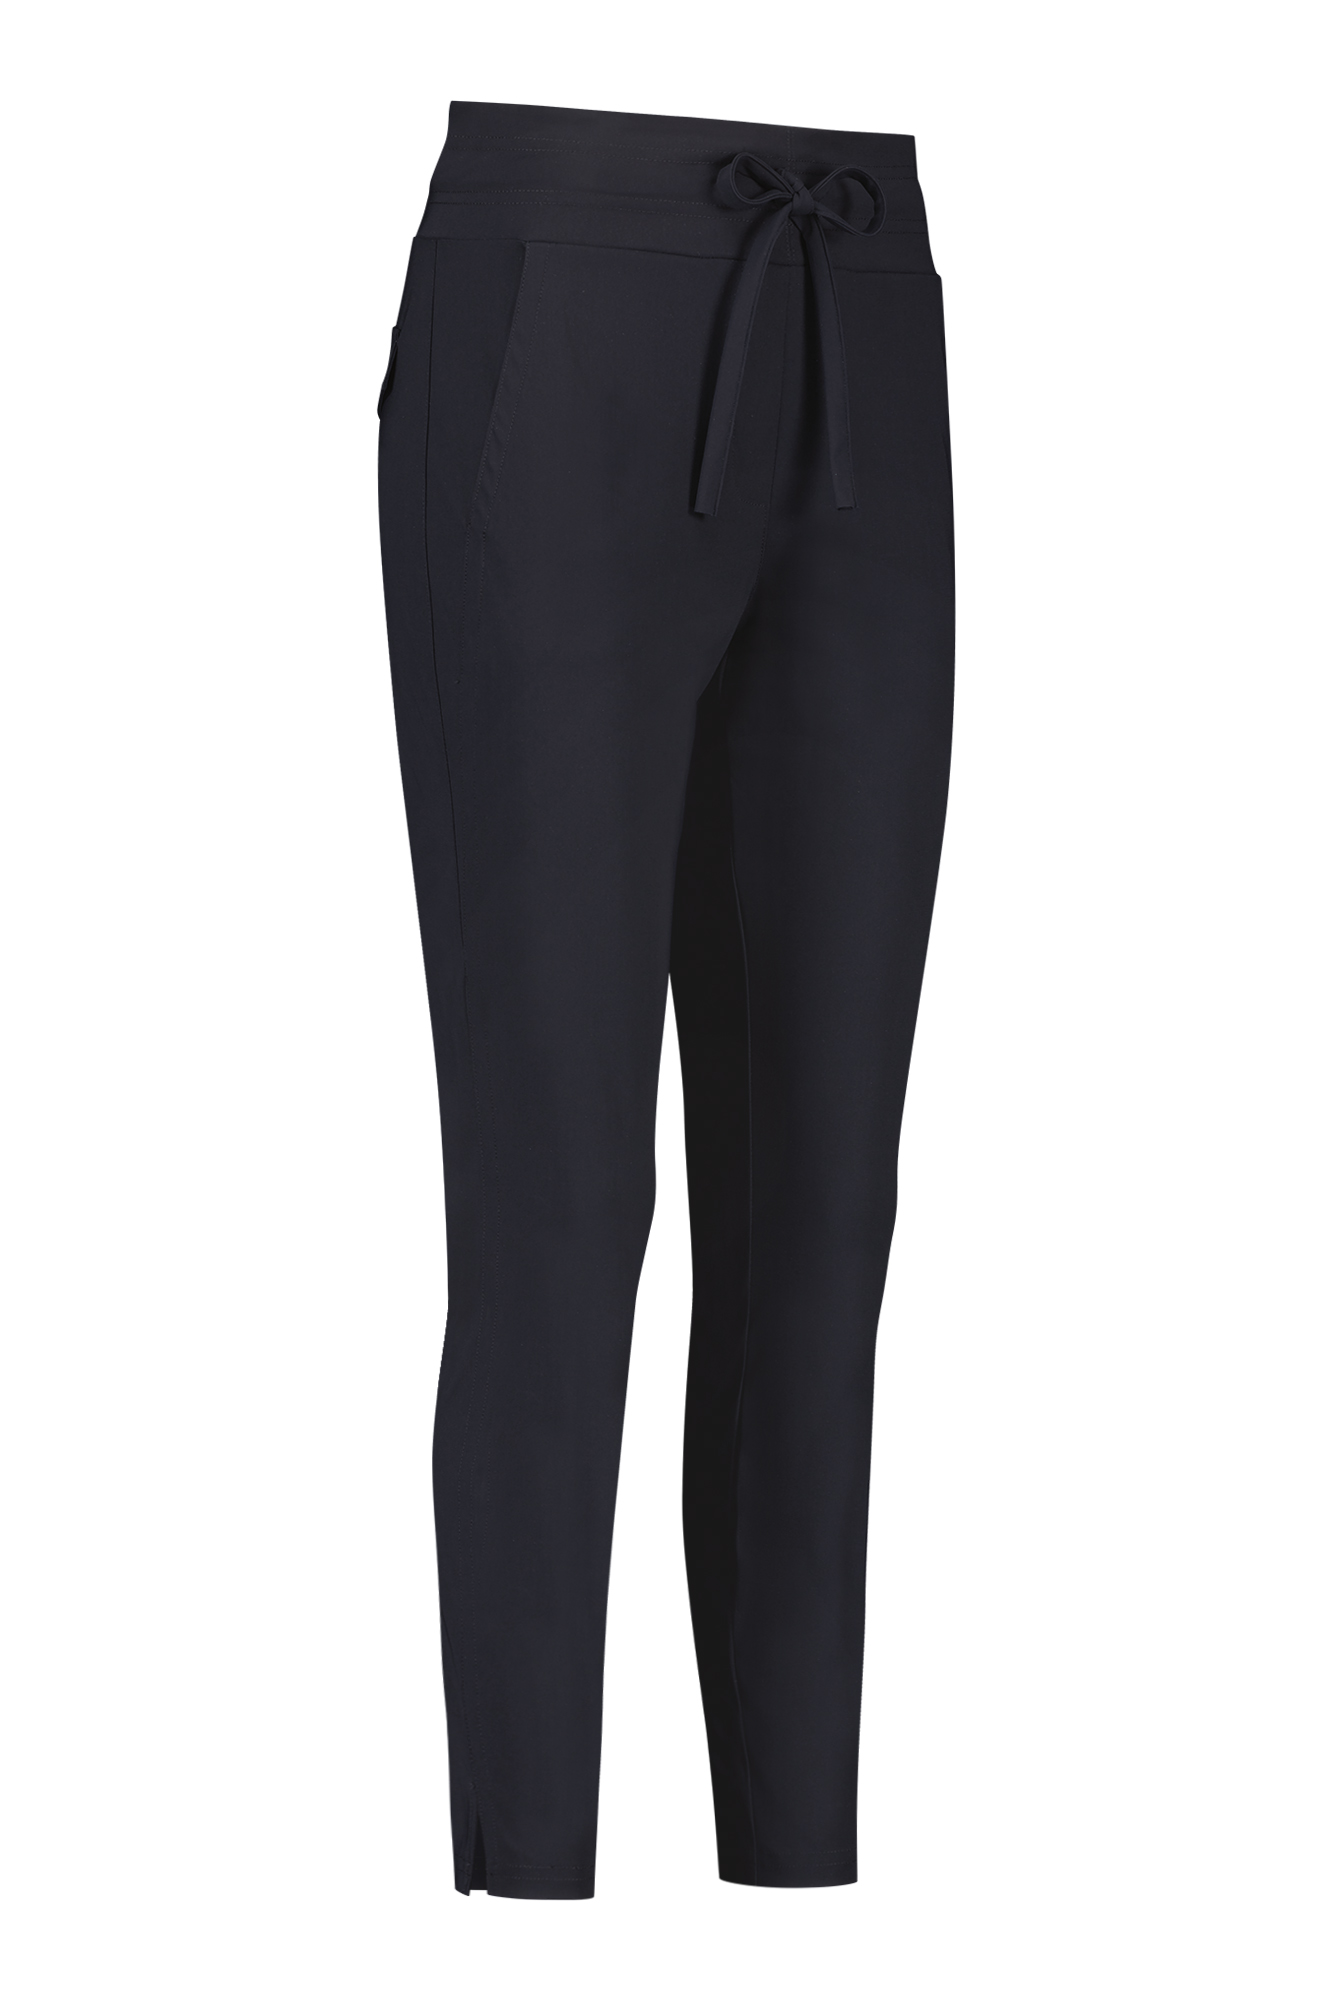 Studio Anneloes startup trousers Blauw-1 1